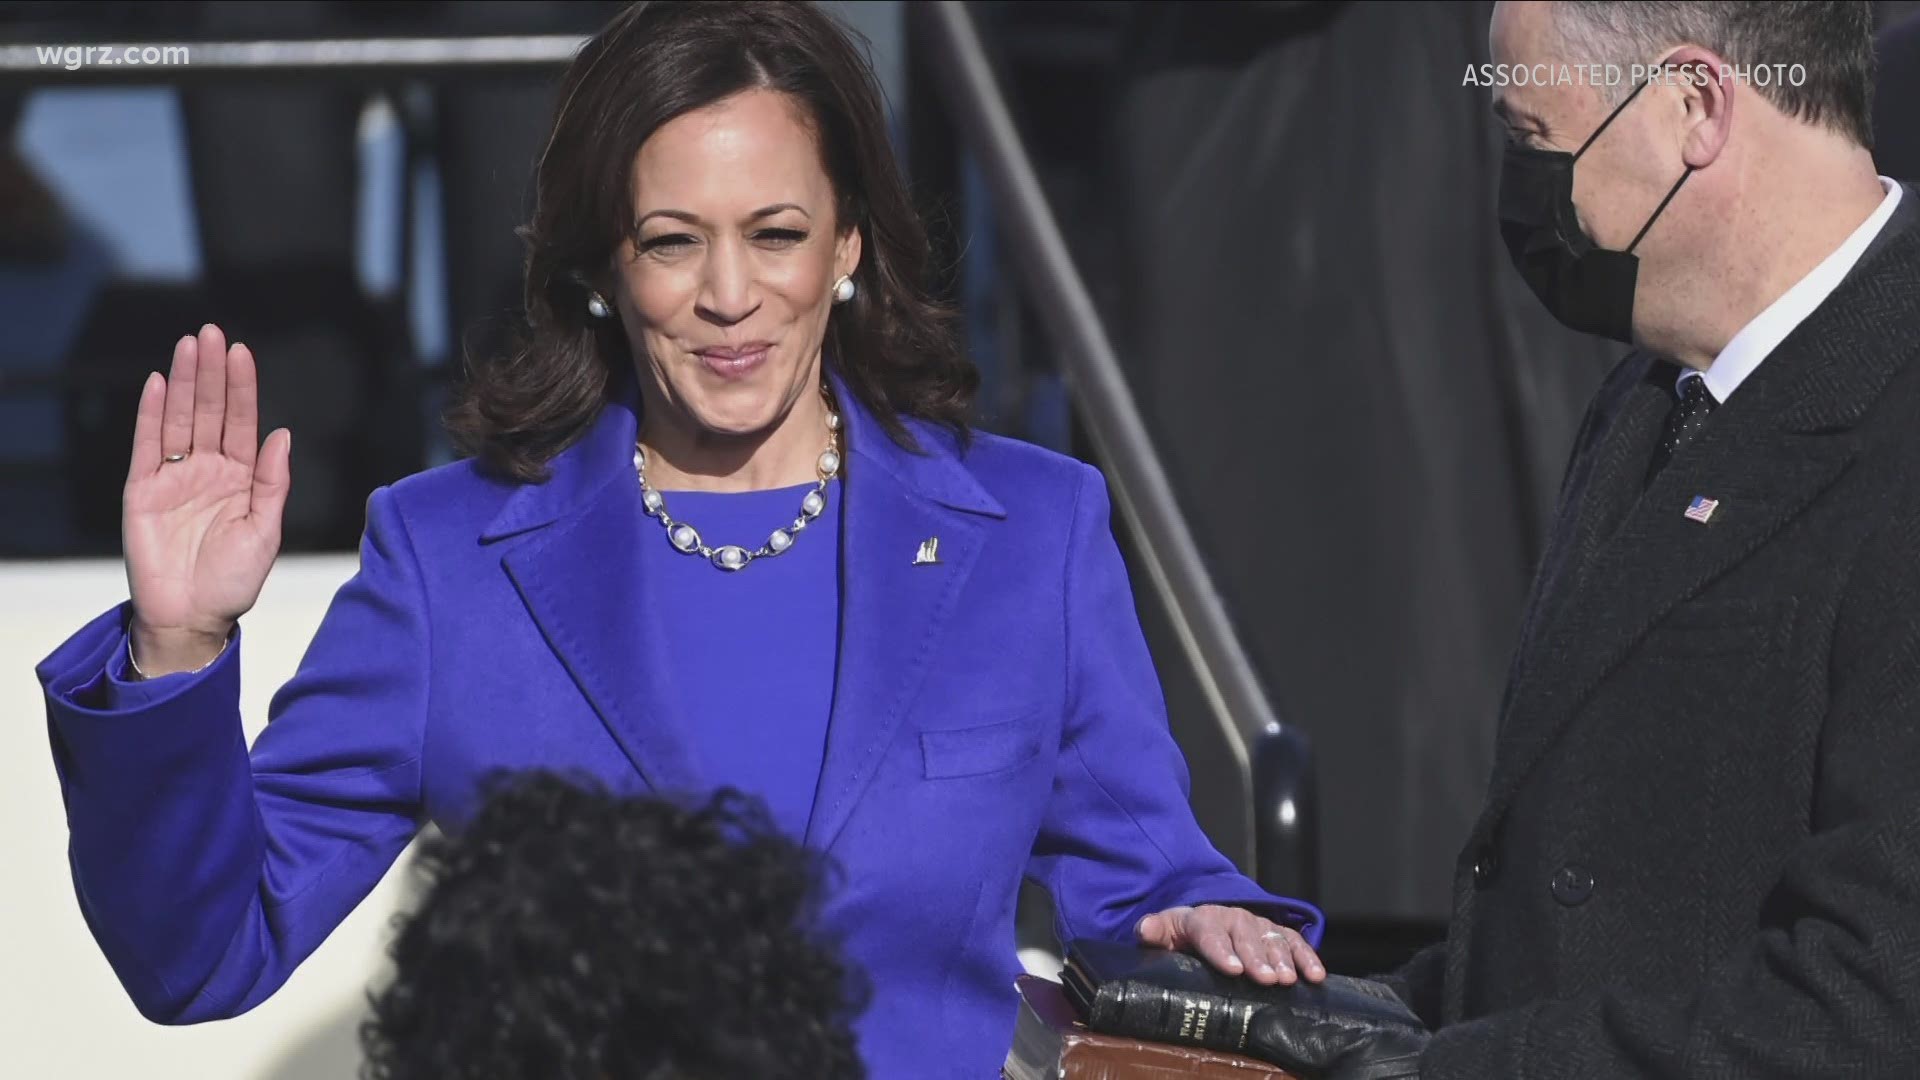 Vice President Harris made history Wednesday afternoon as the first female, Black vice president when she was sworn into office.